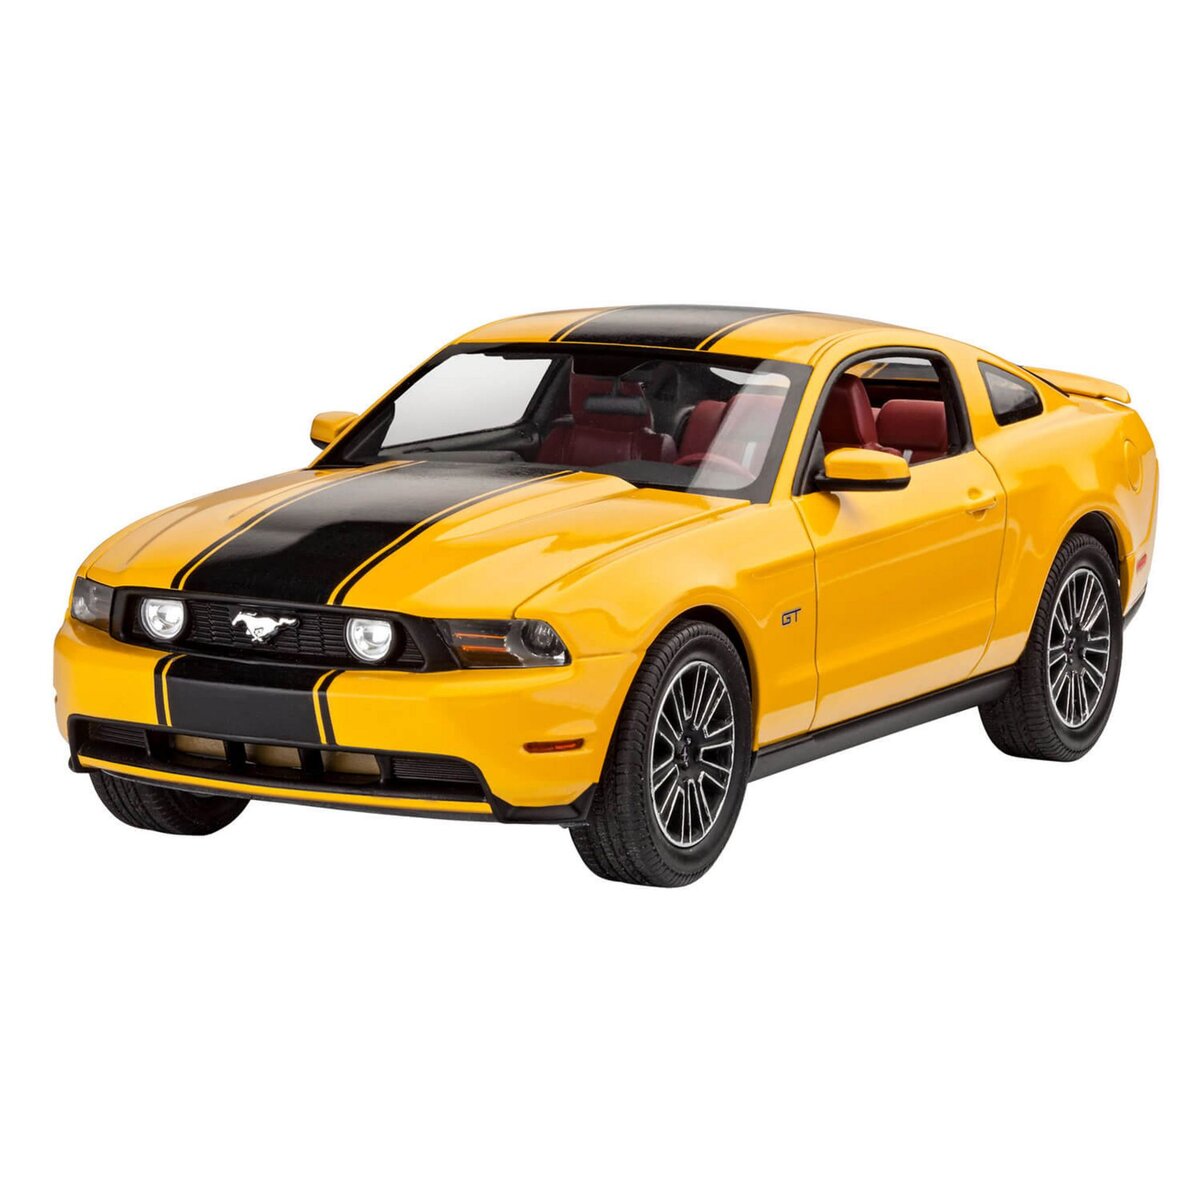 Revell Maquette voiture : Ford Mustang GT 2010 pas cher 